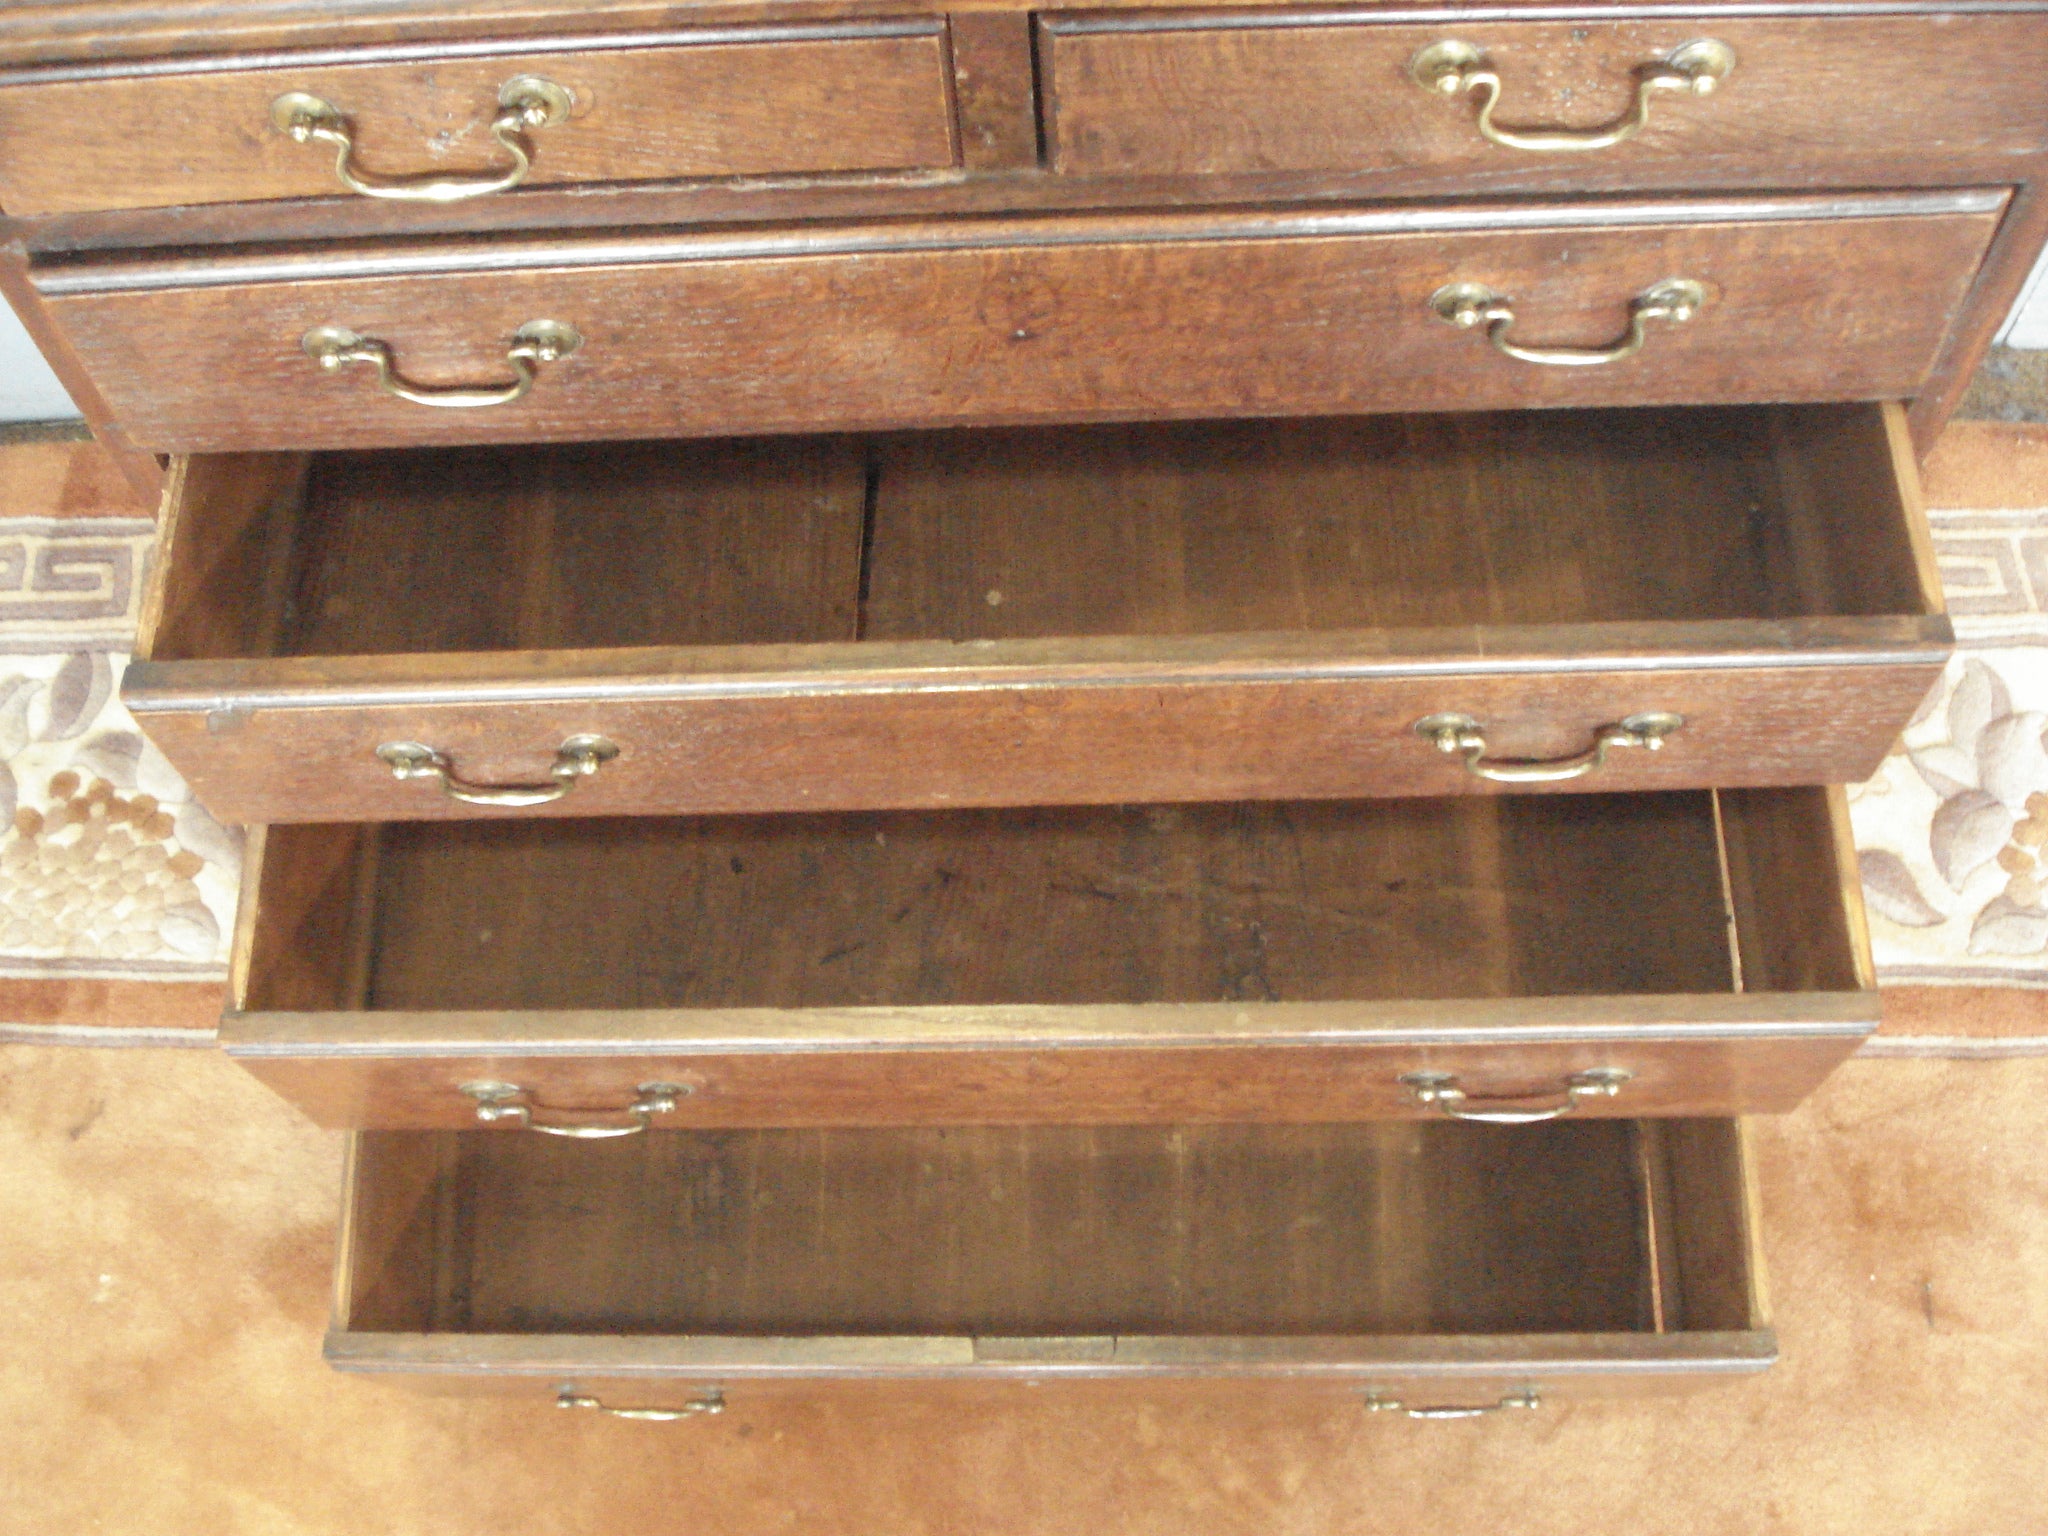 Narrow late C18th small six drawer oak chest. In its original finish.